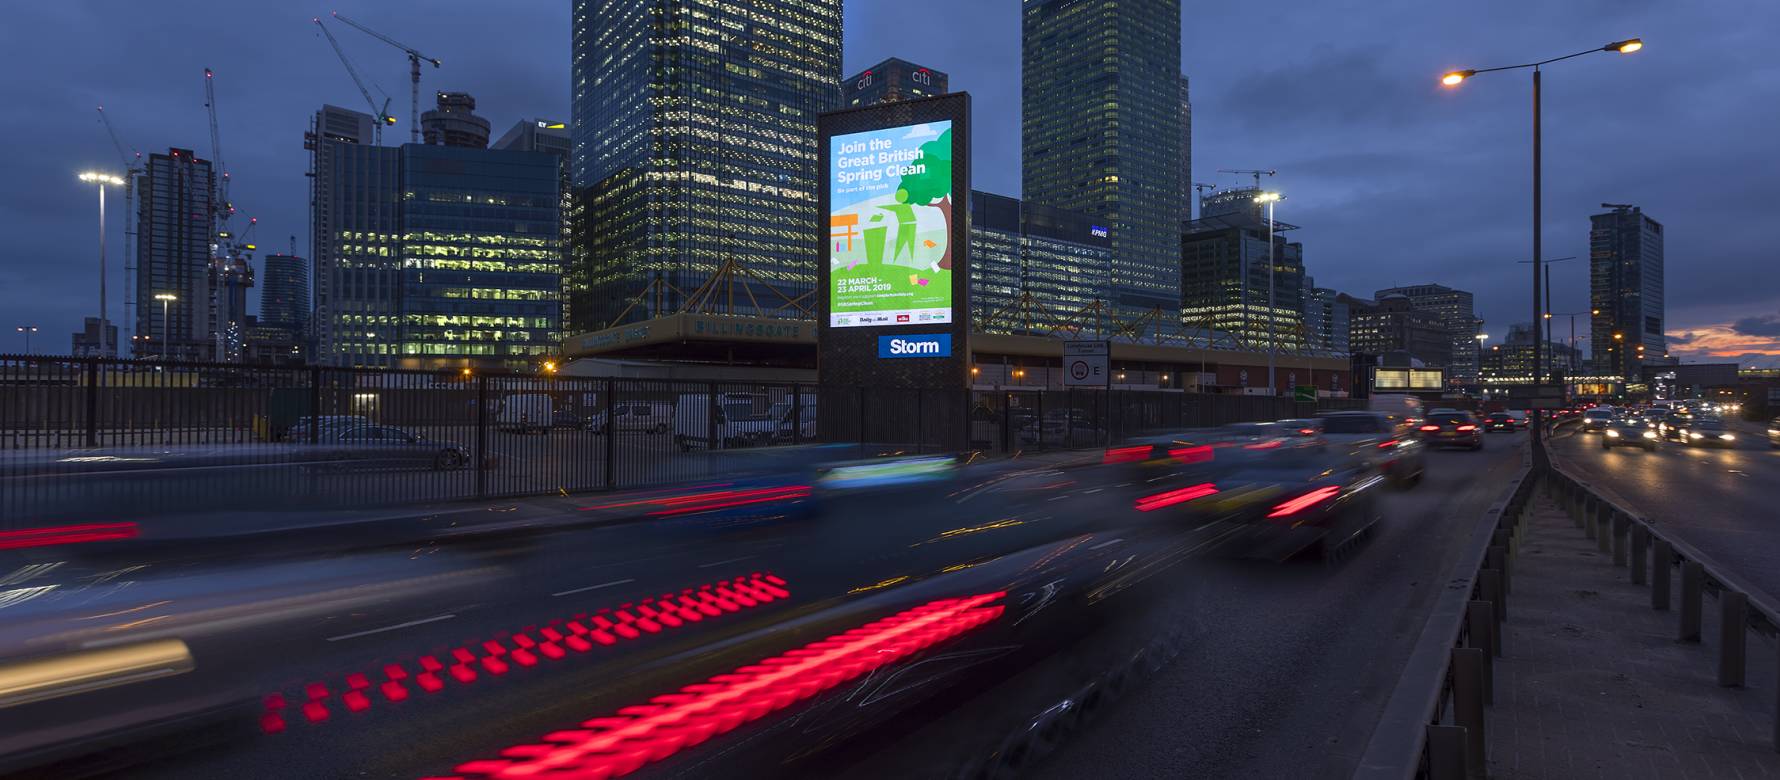 Storm site at night showing Great British Spring Clean advert